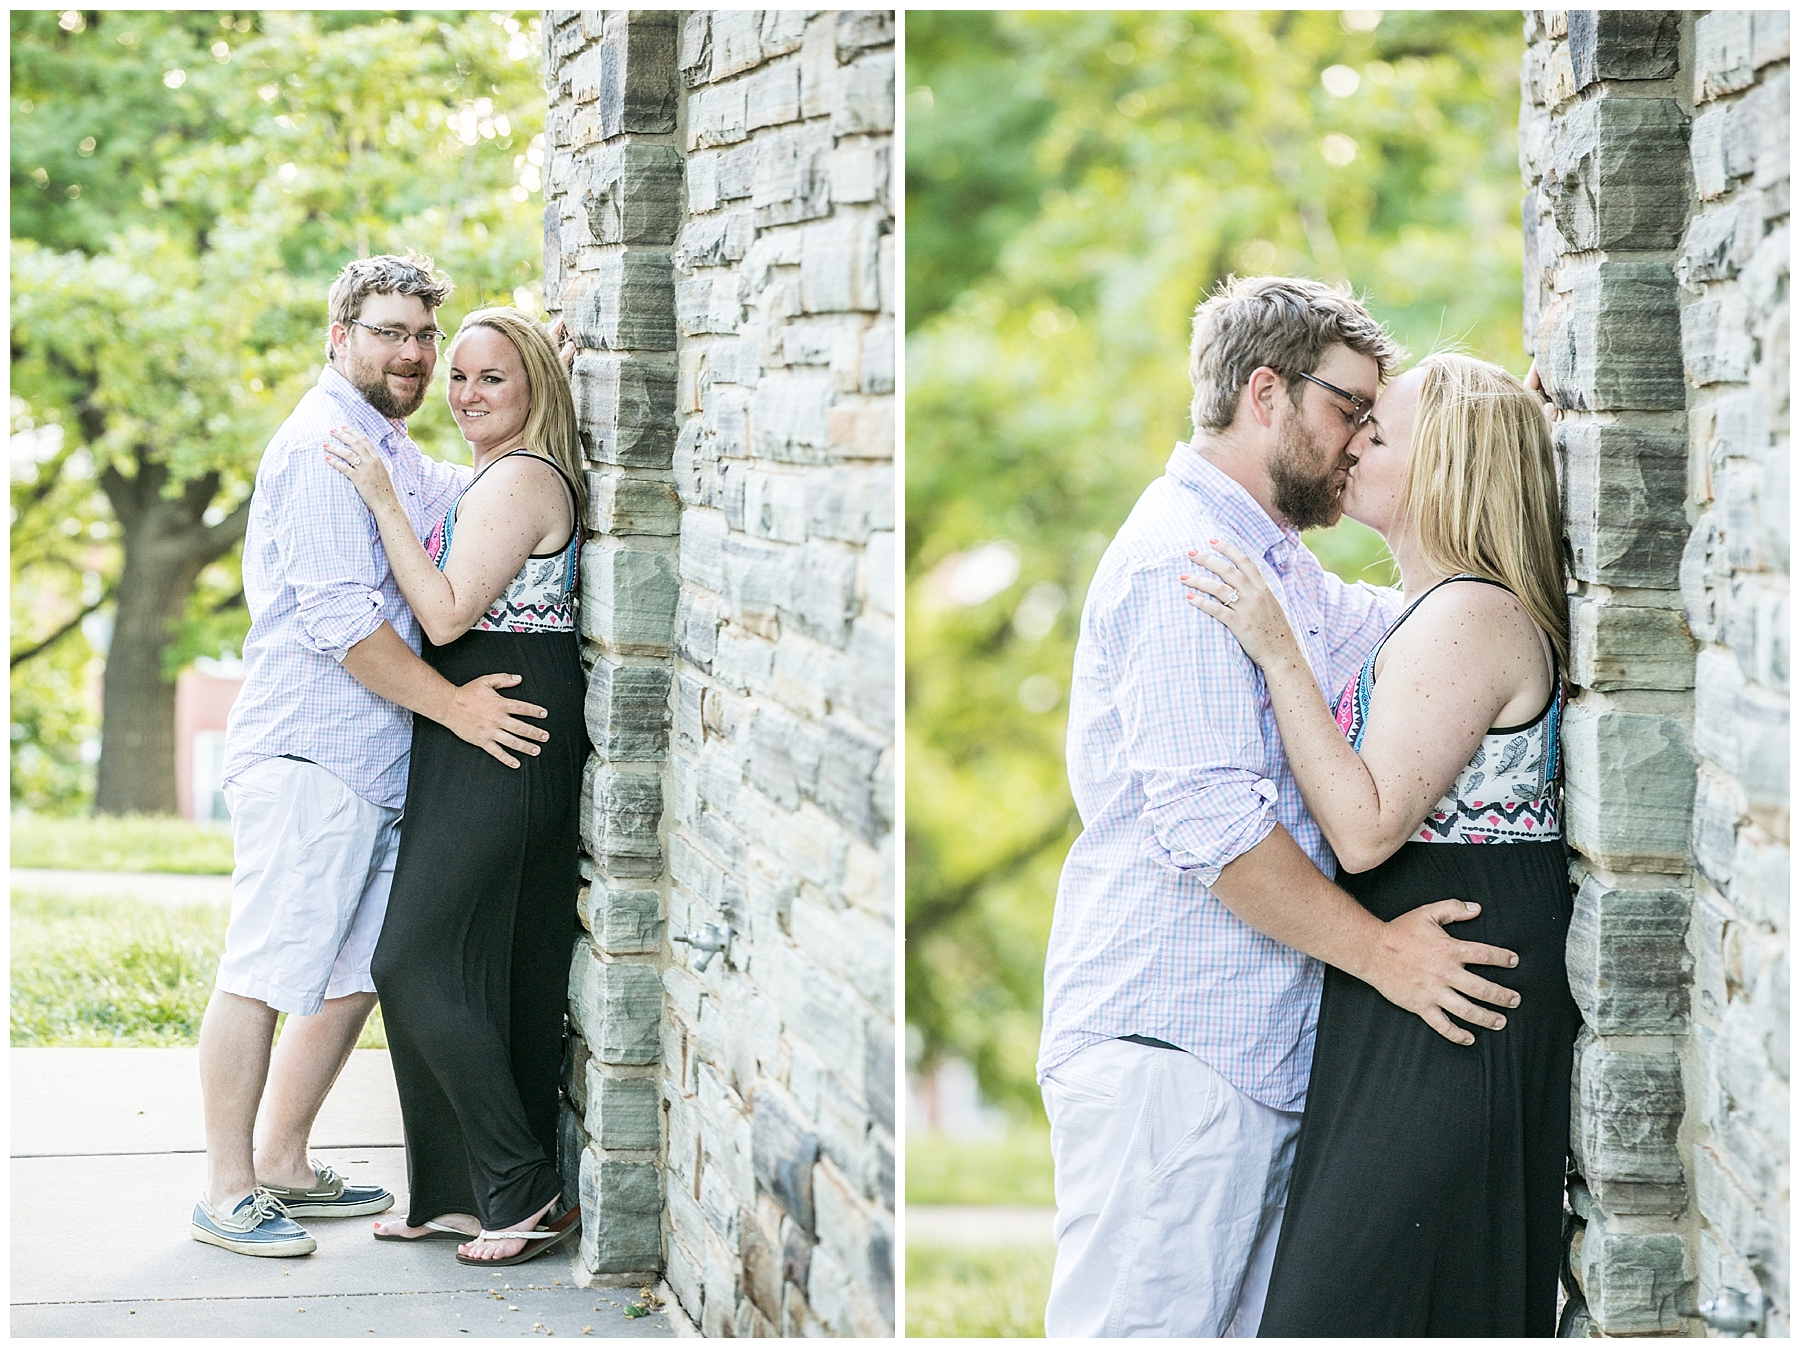 Tess Ray Camden Yards Engagement Session Living Radiant Photography photos_0046.jpg